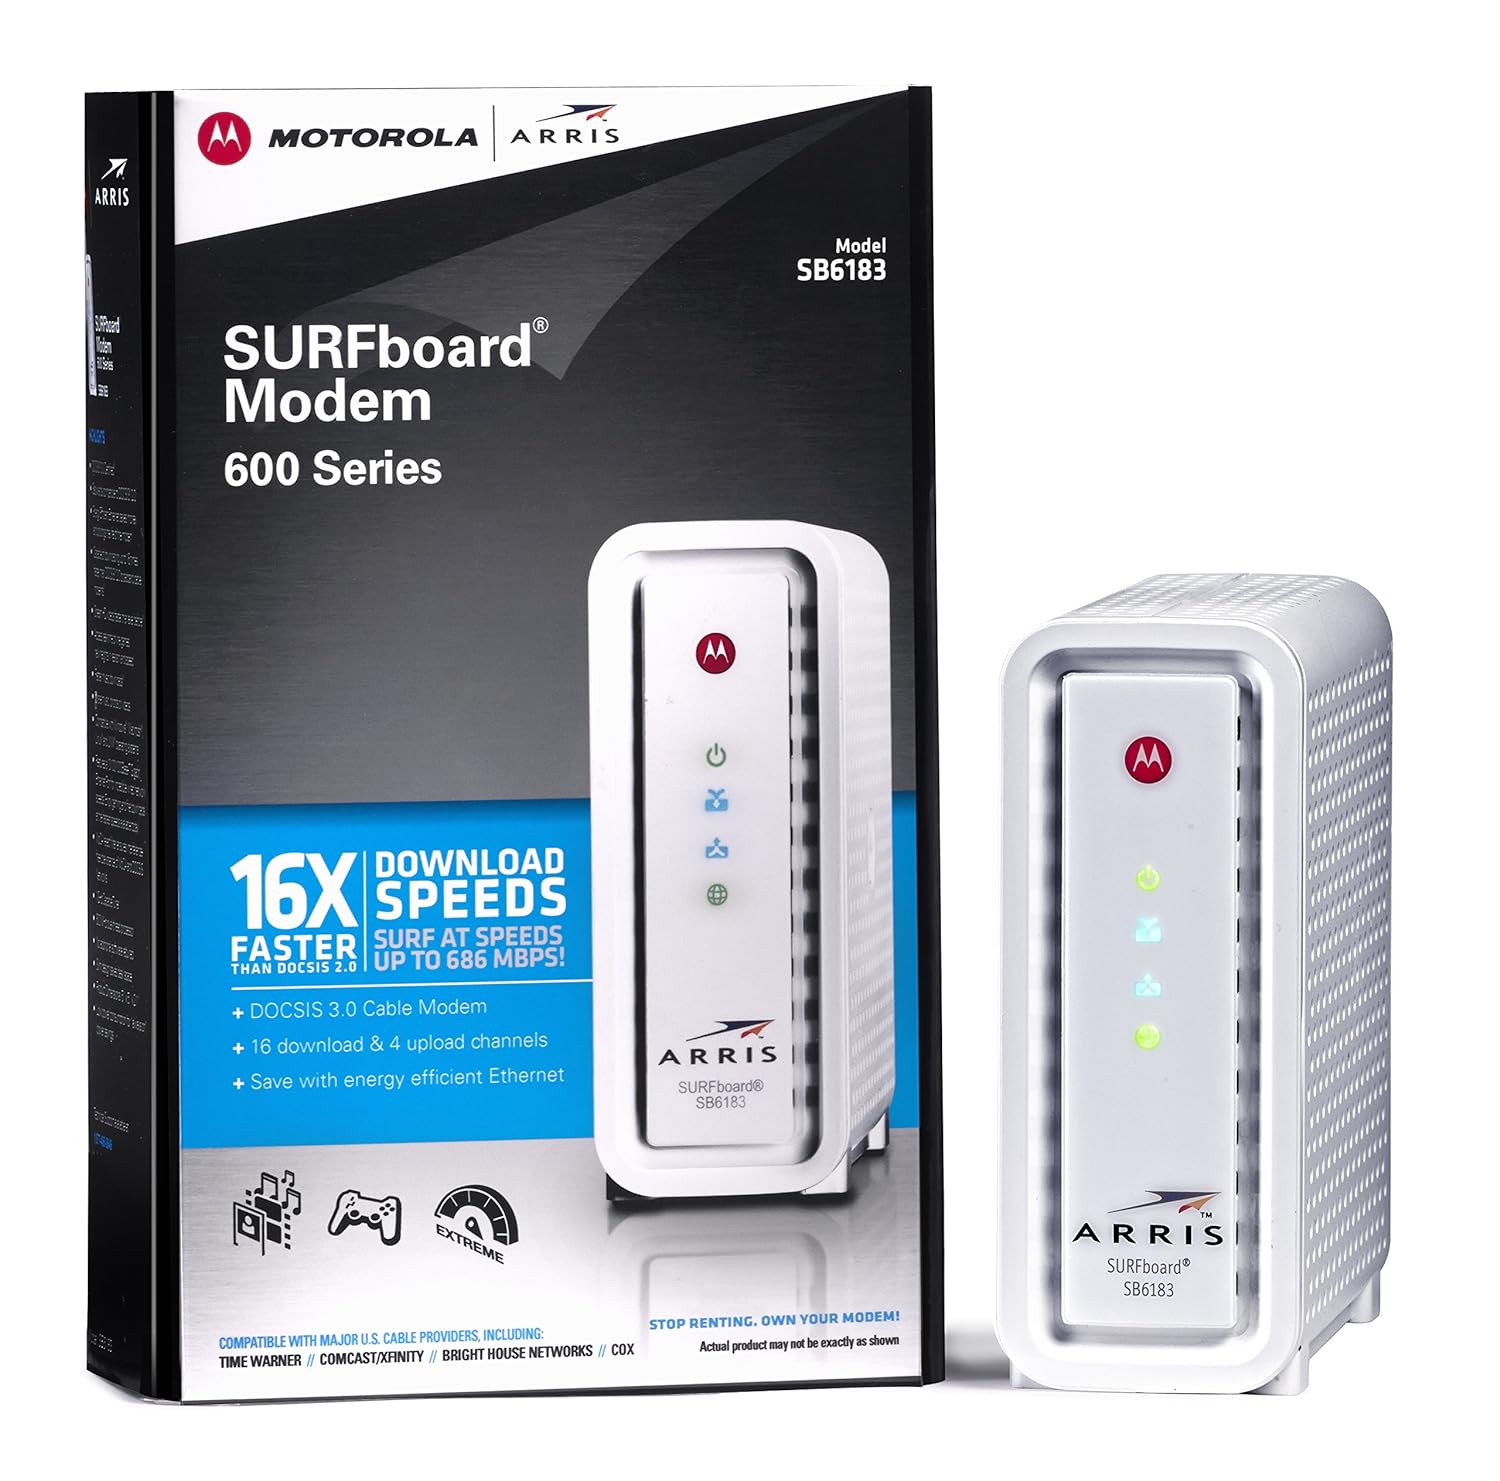 ARRIS SURFboard SB6183 DOCSIS 3.0 Cable Modem - Retail Packaging - White